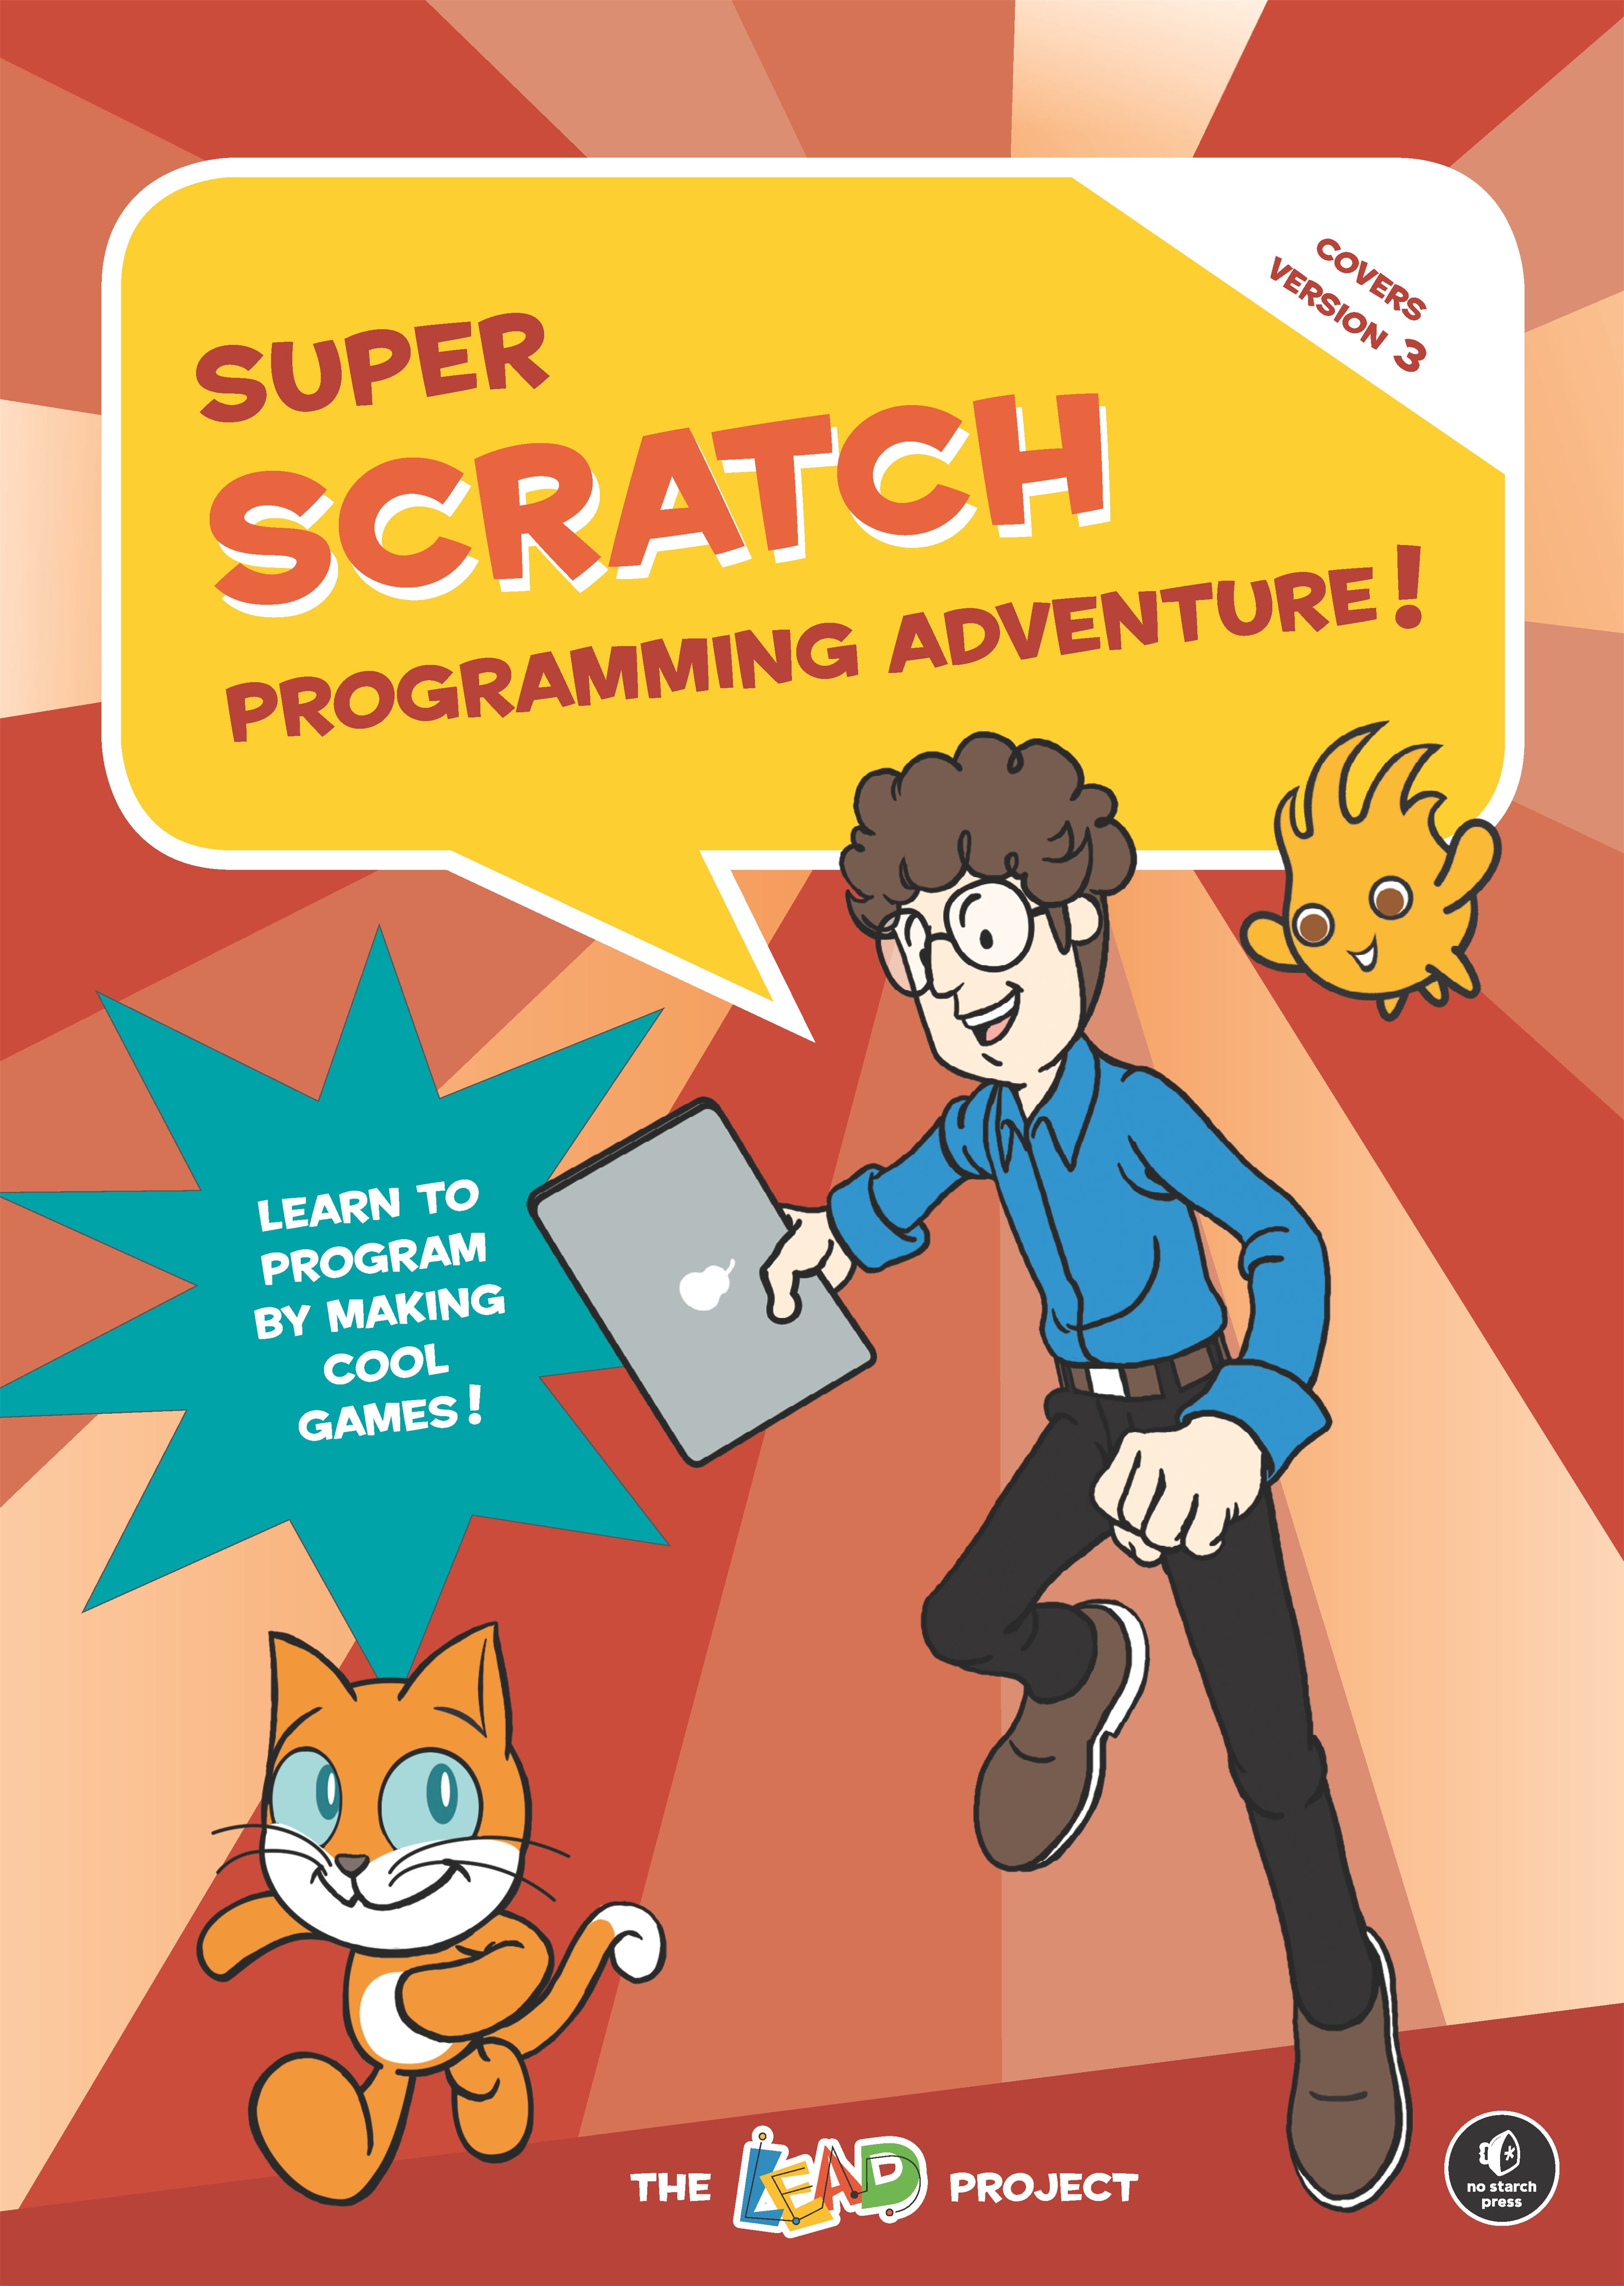 Educational Programming Adventures: Engaging Tech Learning